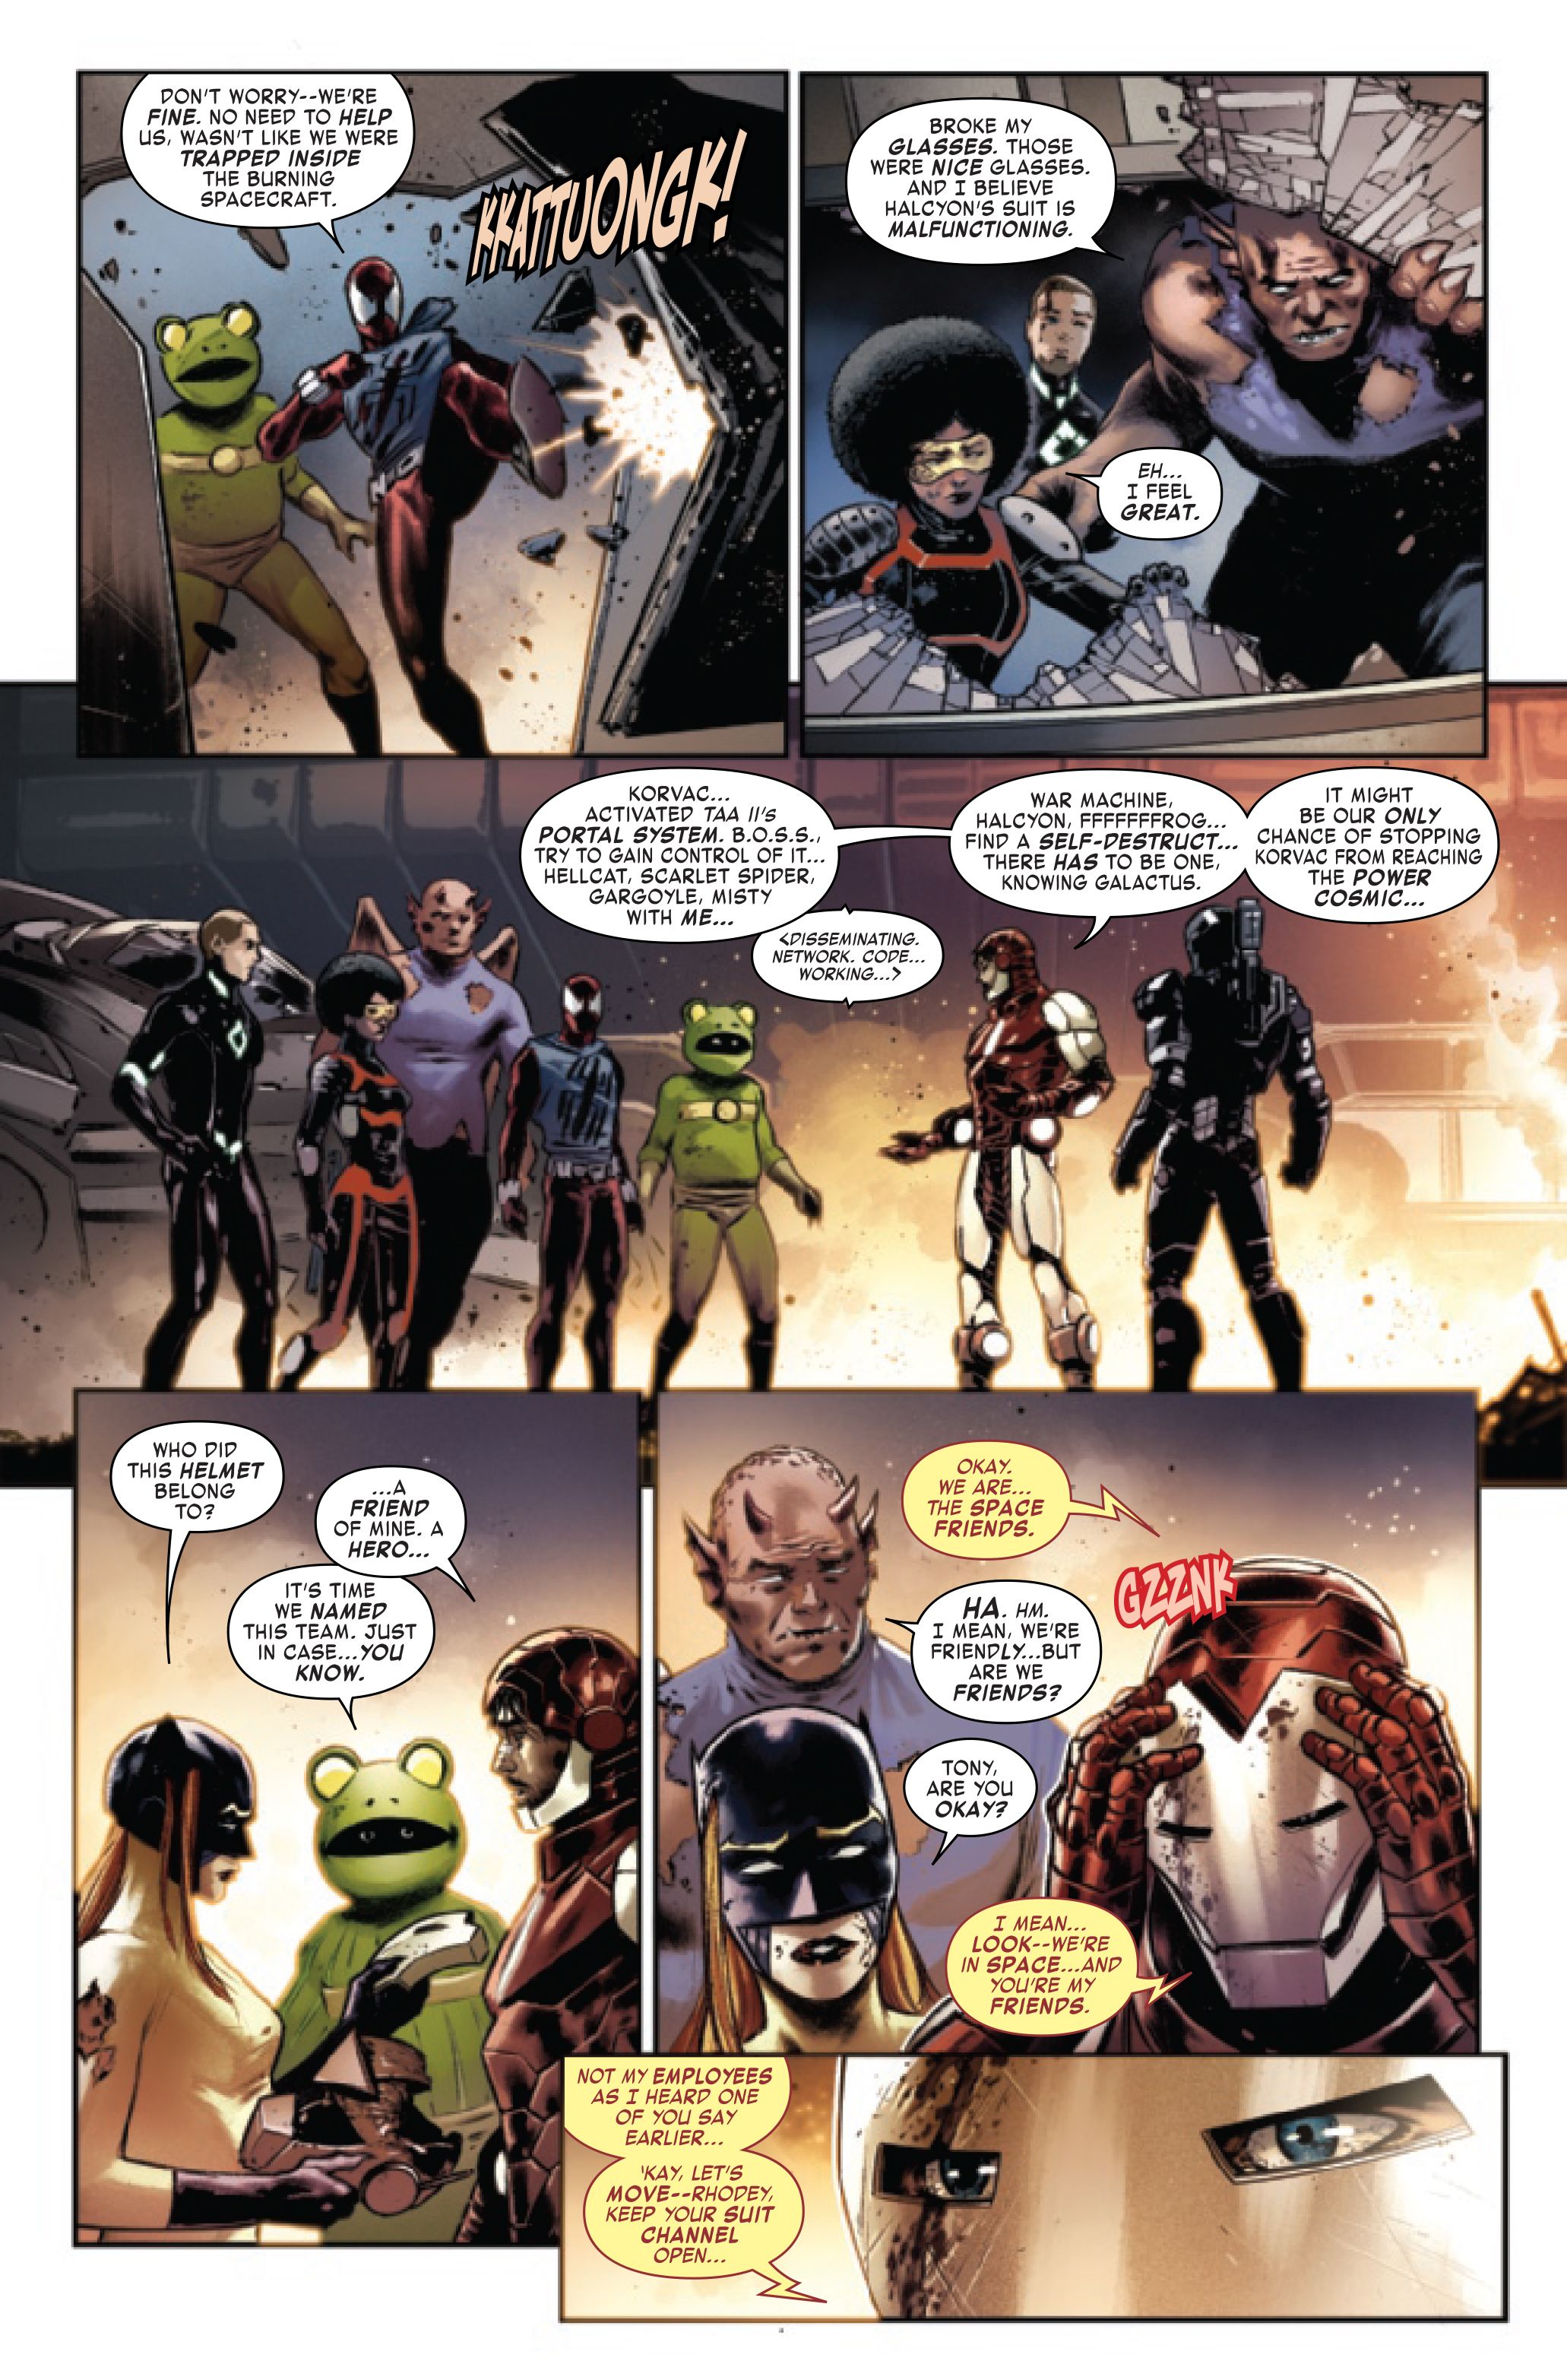 Page 4 of Iron Man #13, by Christopher Cantwell and Cafu.